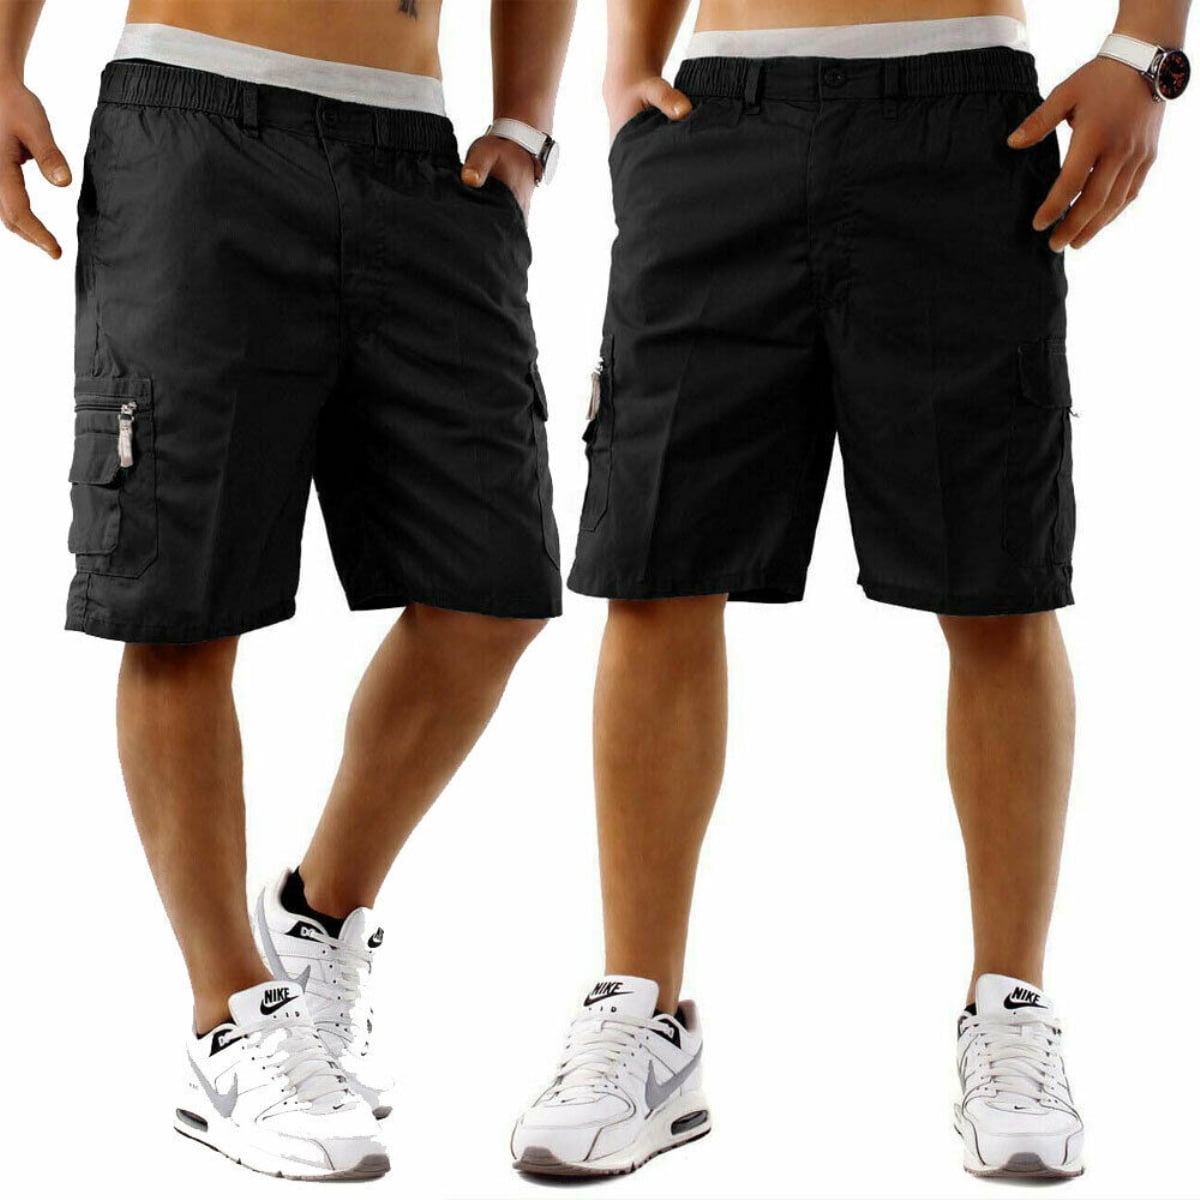 Calsunbaby - New Mens Summer Shorts Cotton Casual Half Pant Stretch ...